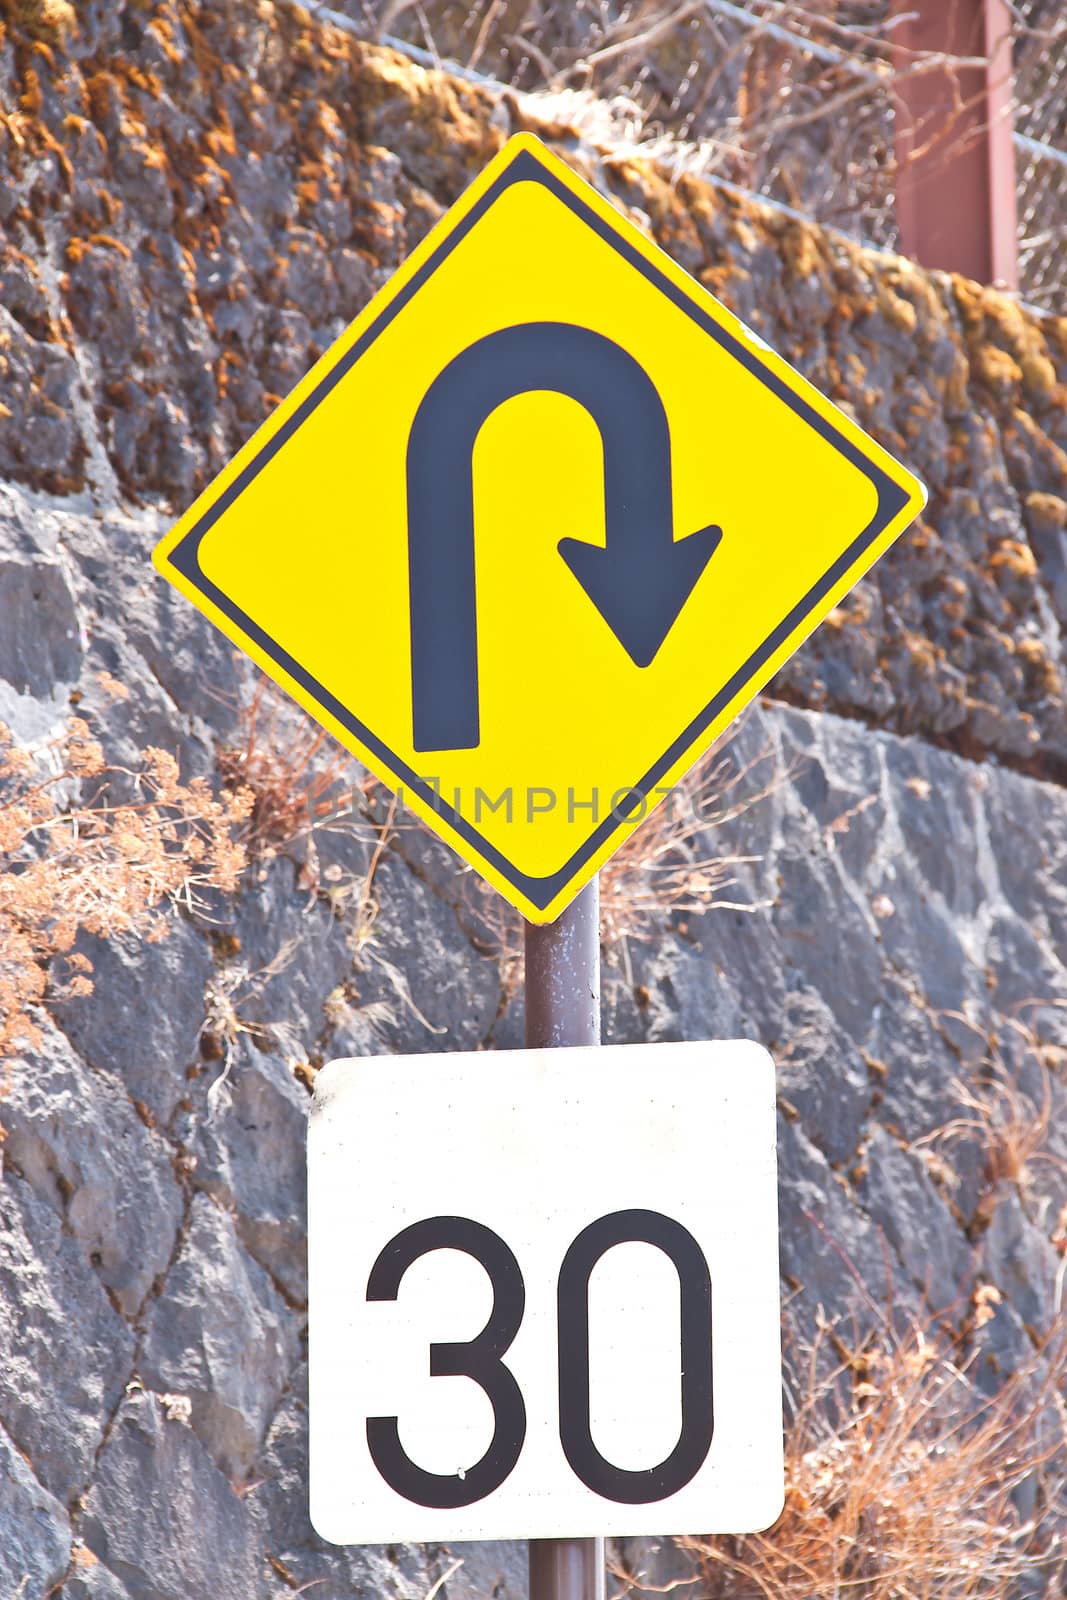 traffic sign to return the vehicle speed ������30 km.